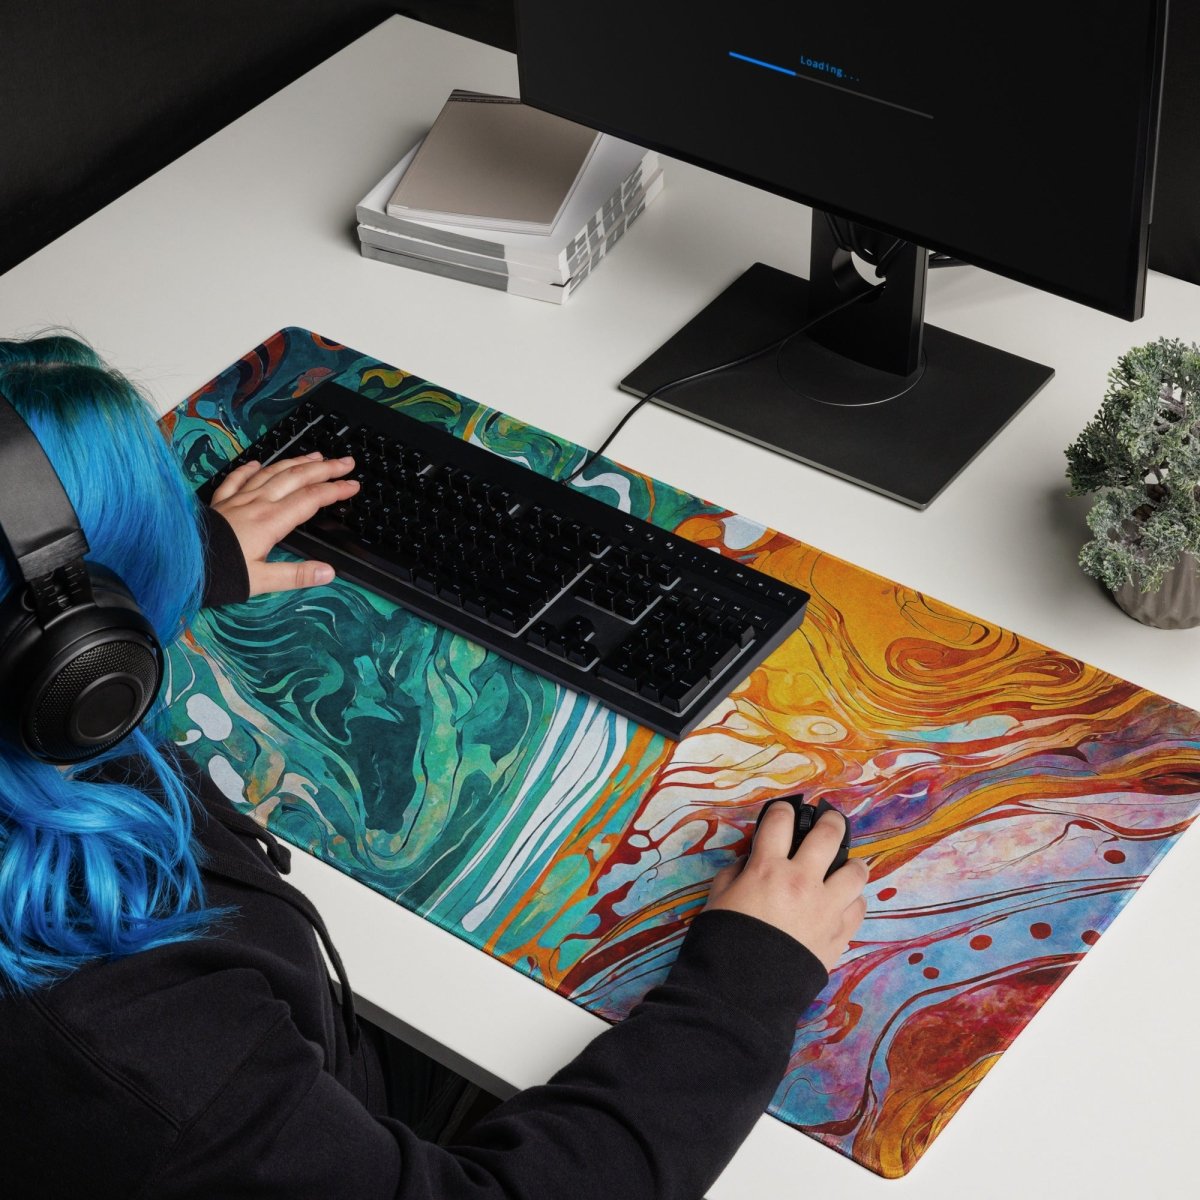 Stained current - Gaming mouse pad - Ever colorful